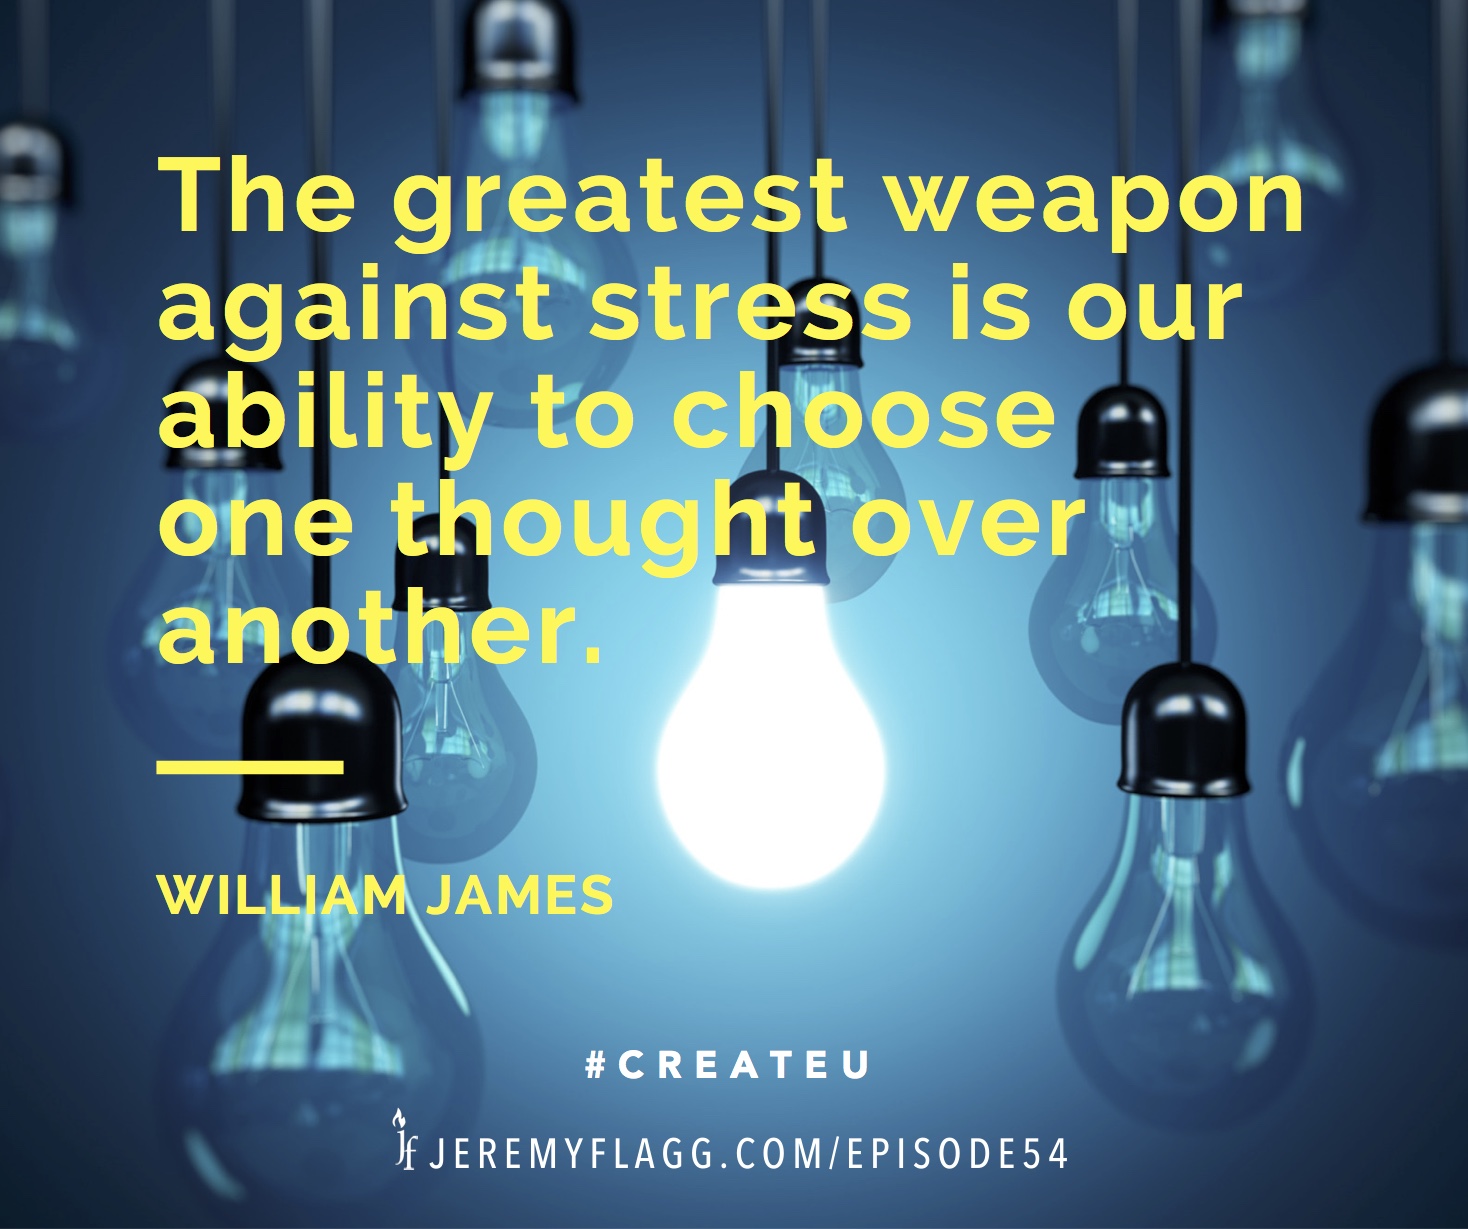 The-greatest-weapon-against-stress-William-James-quote-FB